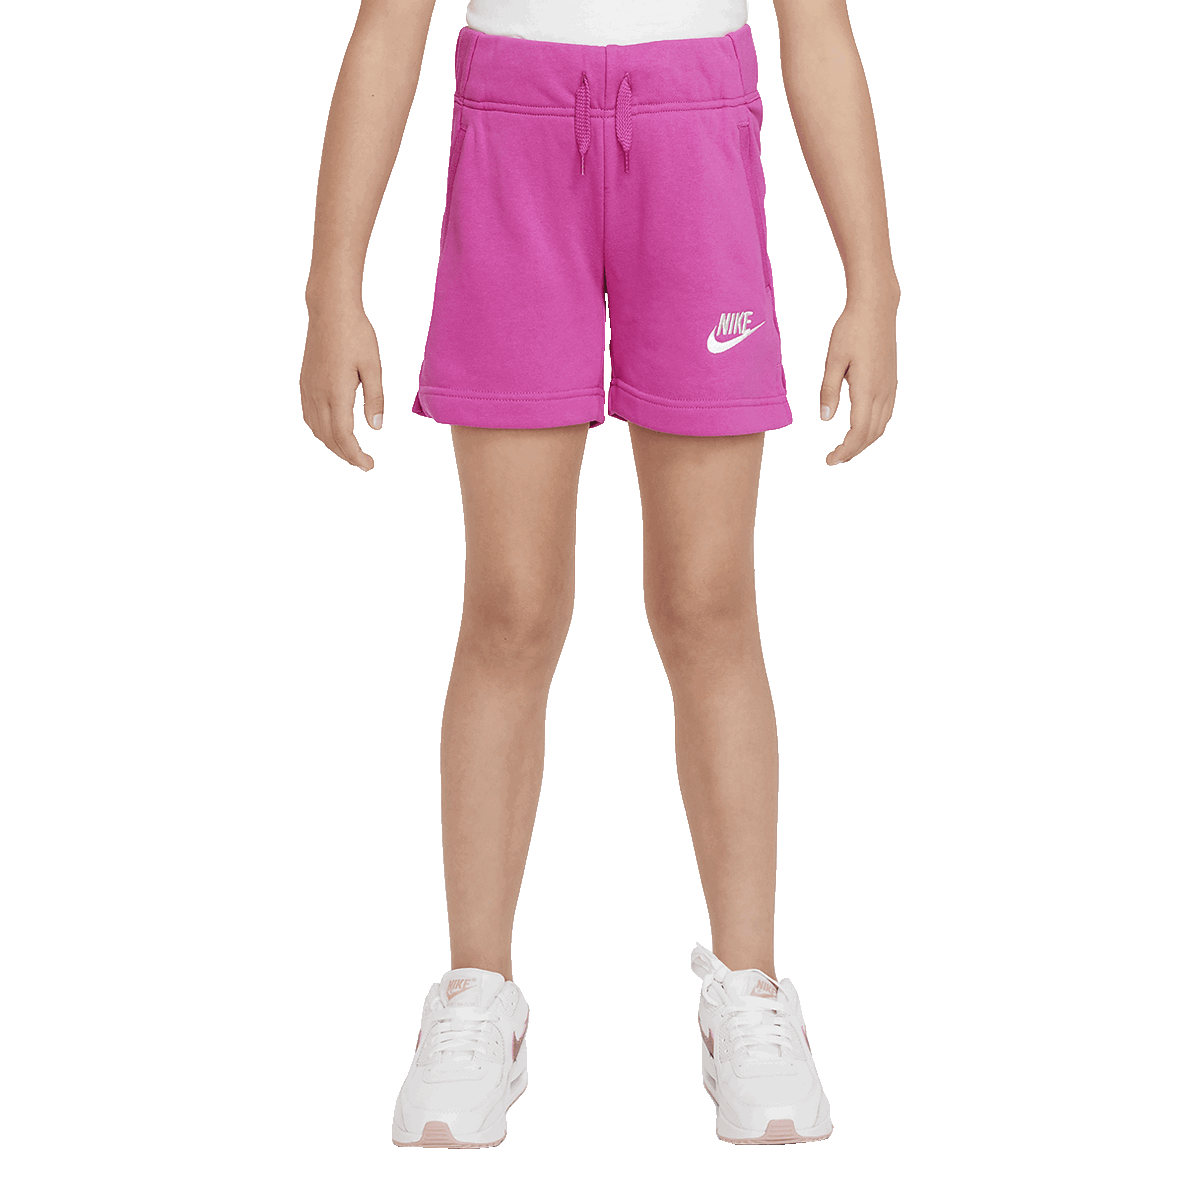 NIKE G NSW CLUB FT 5 IN SHORT 